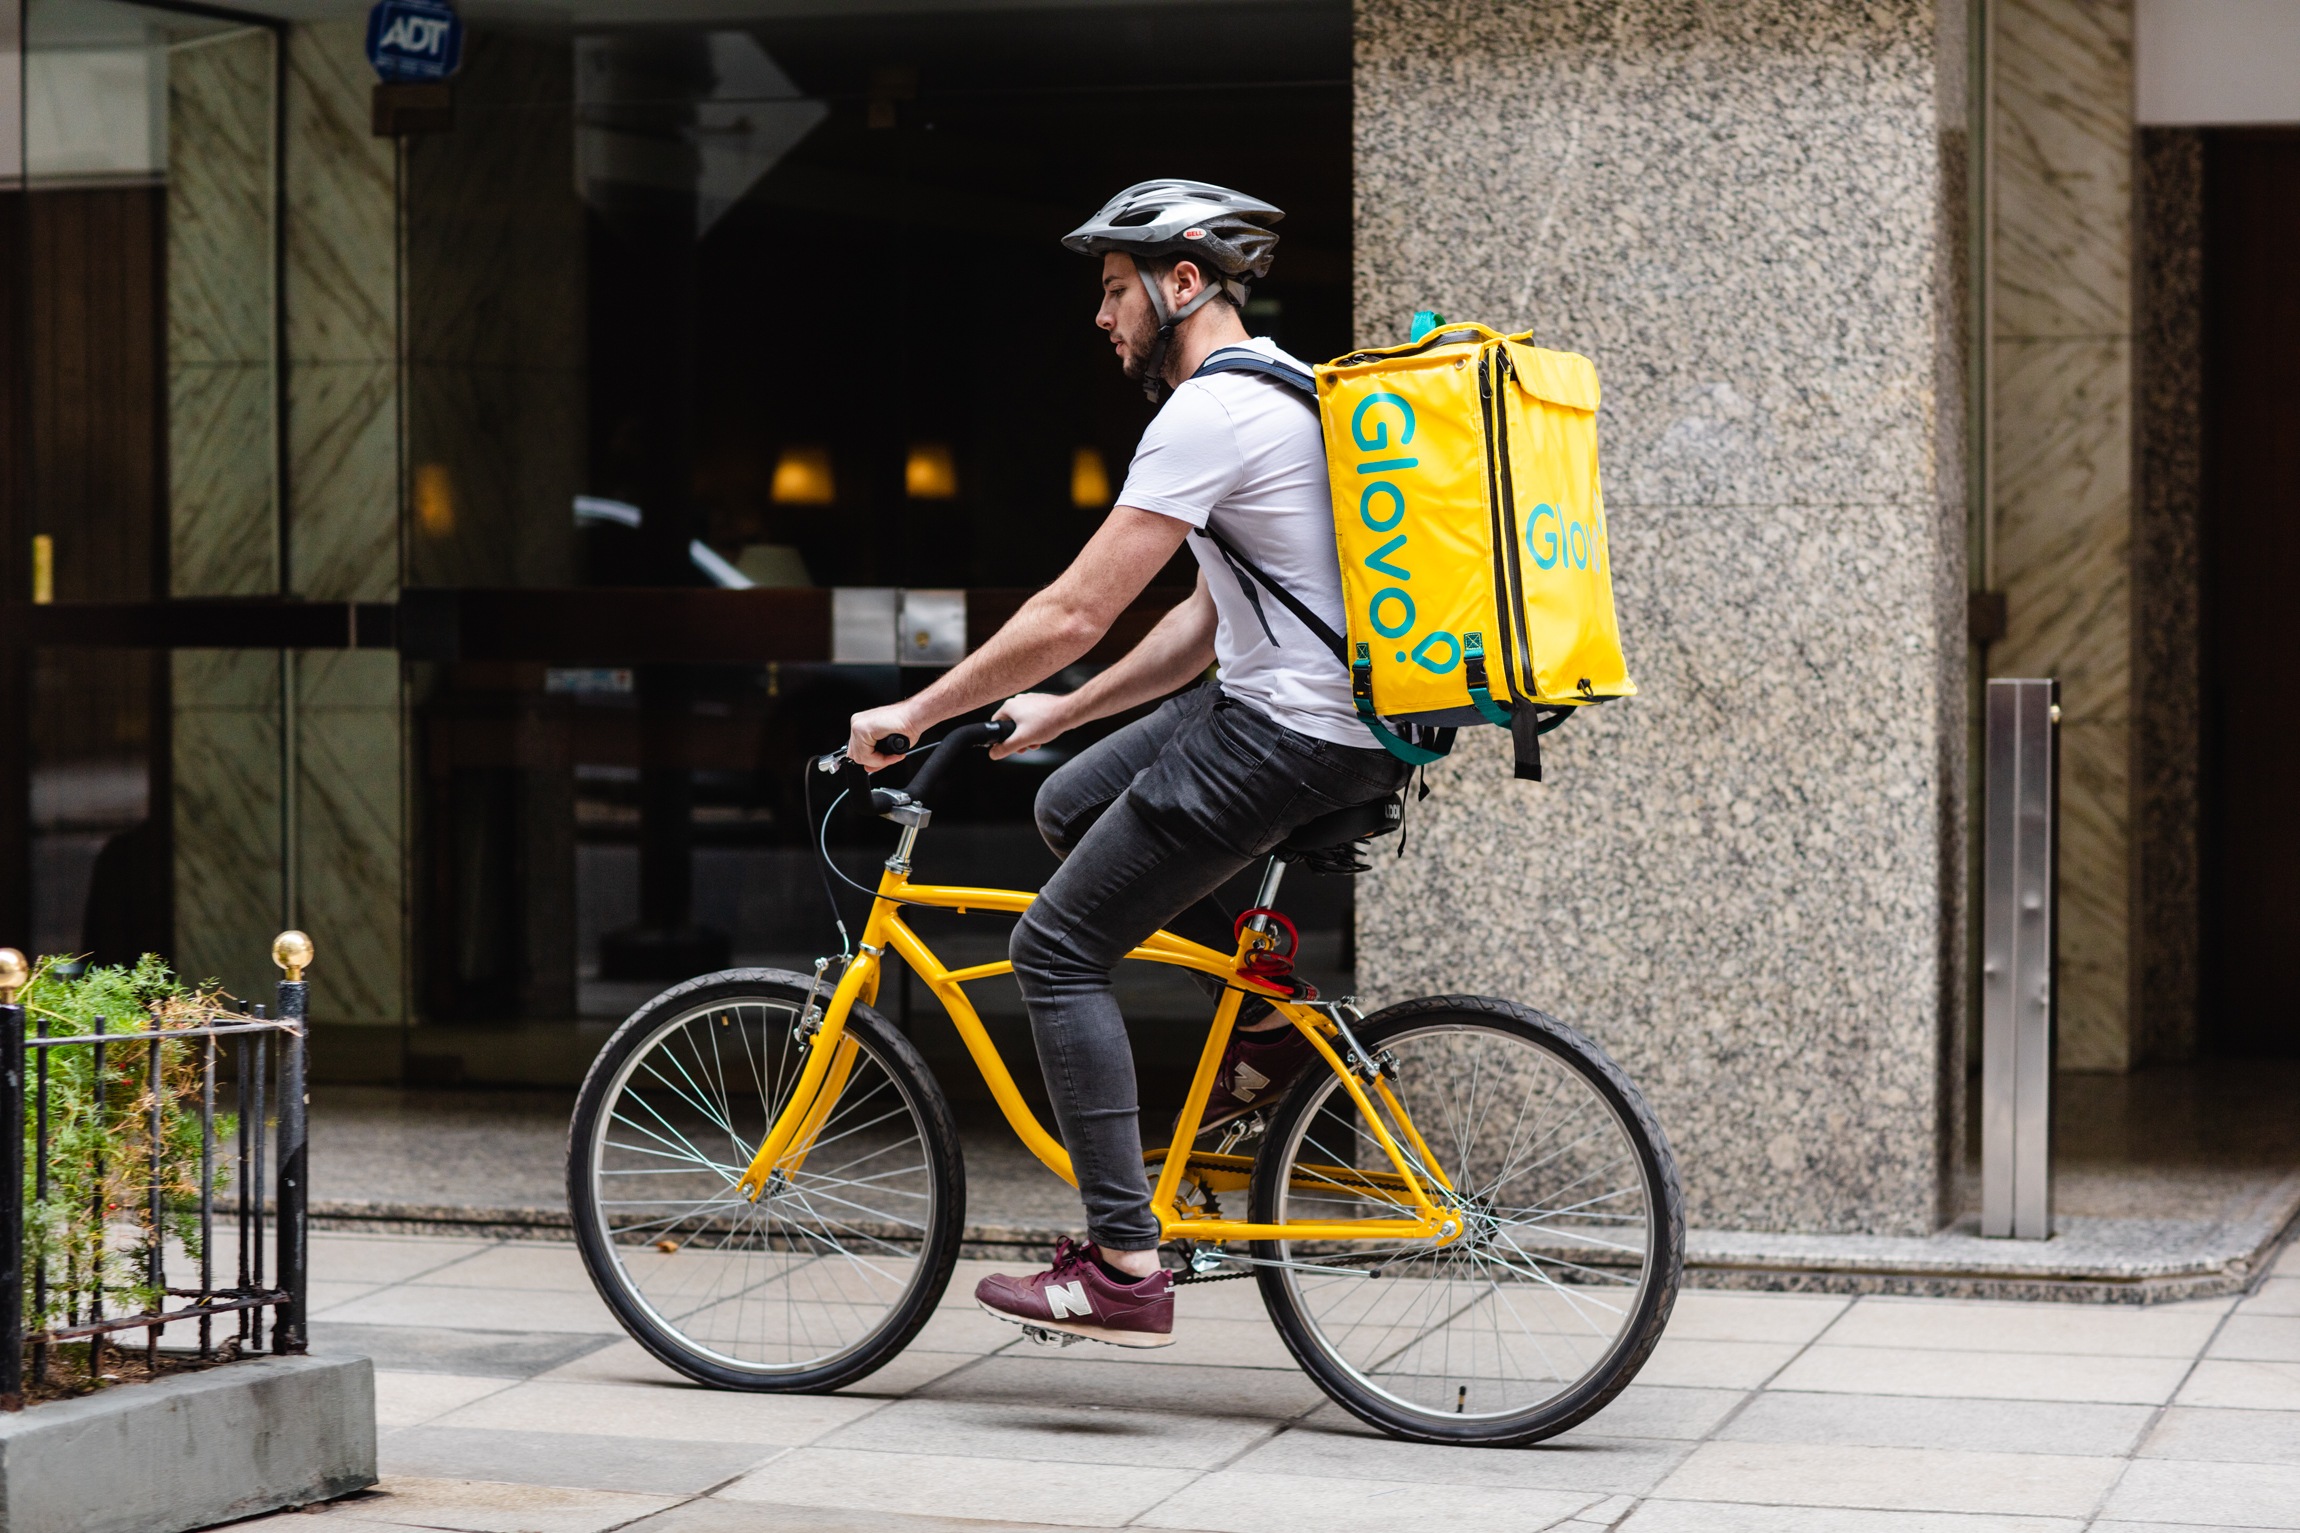 meet glovo: the app that will deliver anything to your door - digital innovation and transformation